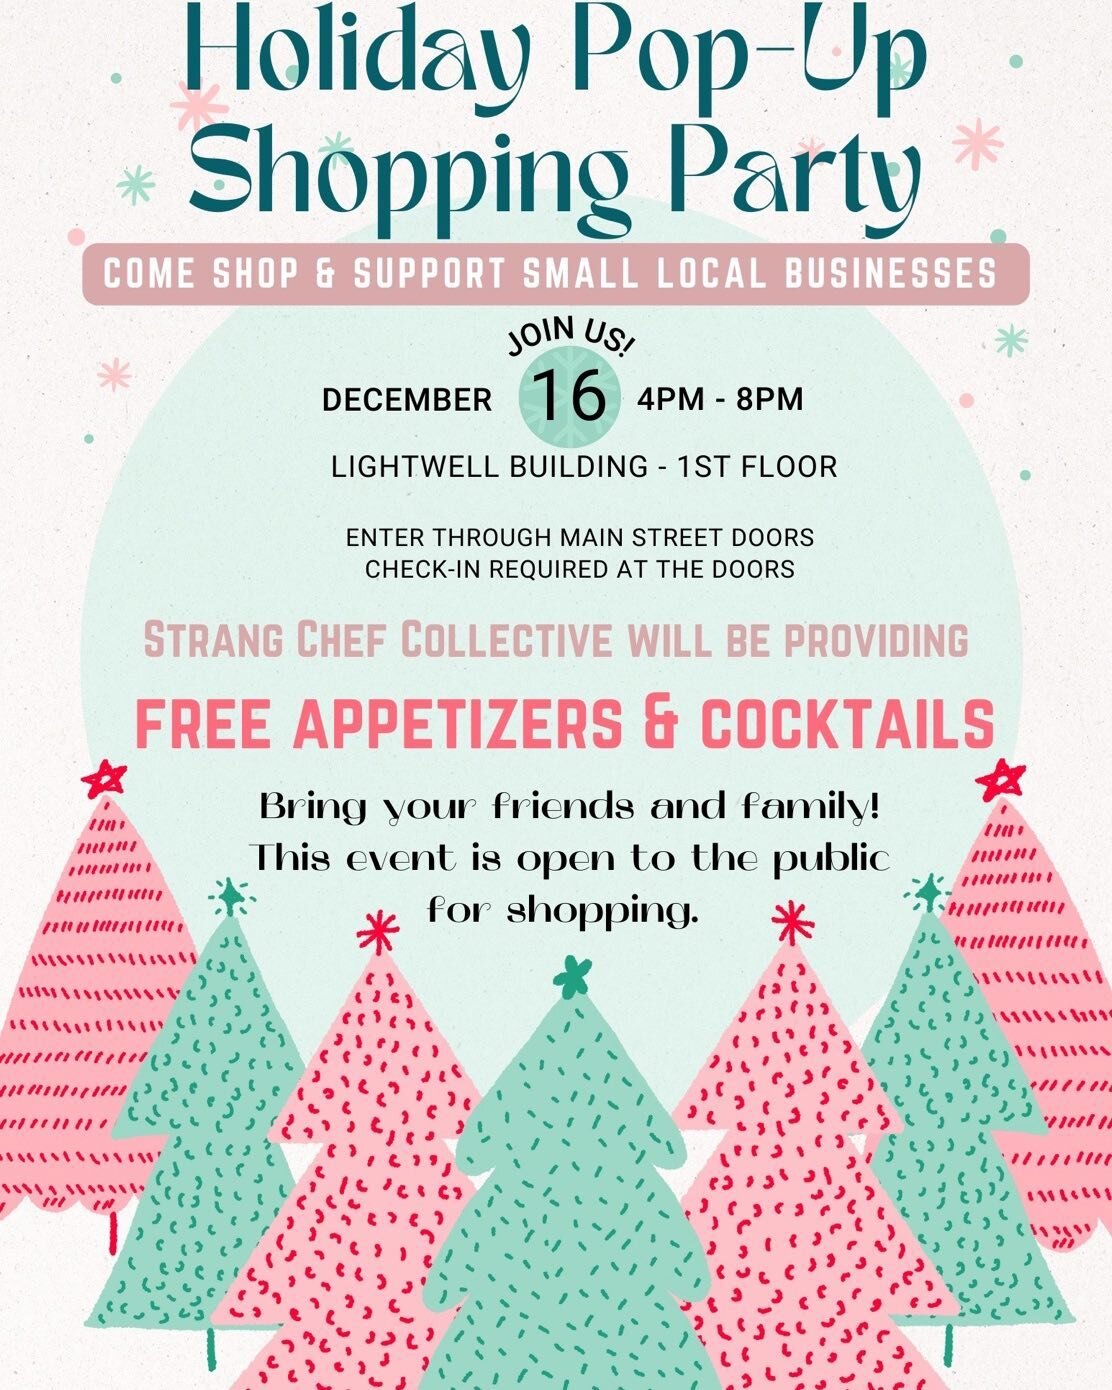 Come to Lightwell for some last minute Christmas shopping THIS Friday from 4pm-8pm. There will be small local businesses set up for everyone to come and shop.

Free cocktails and small appetizers will be available from Strang Chef Collective. 

Light